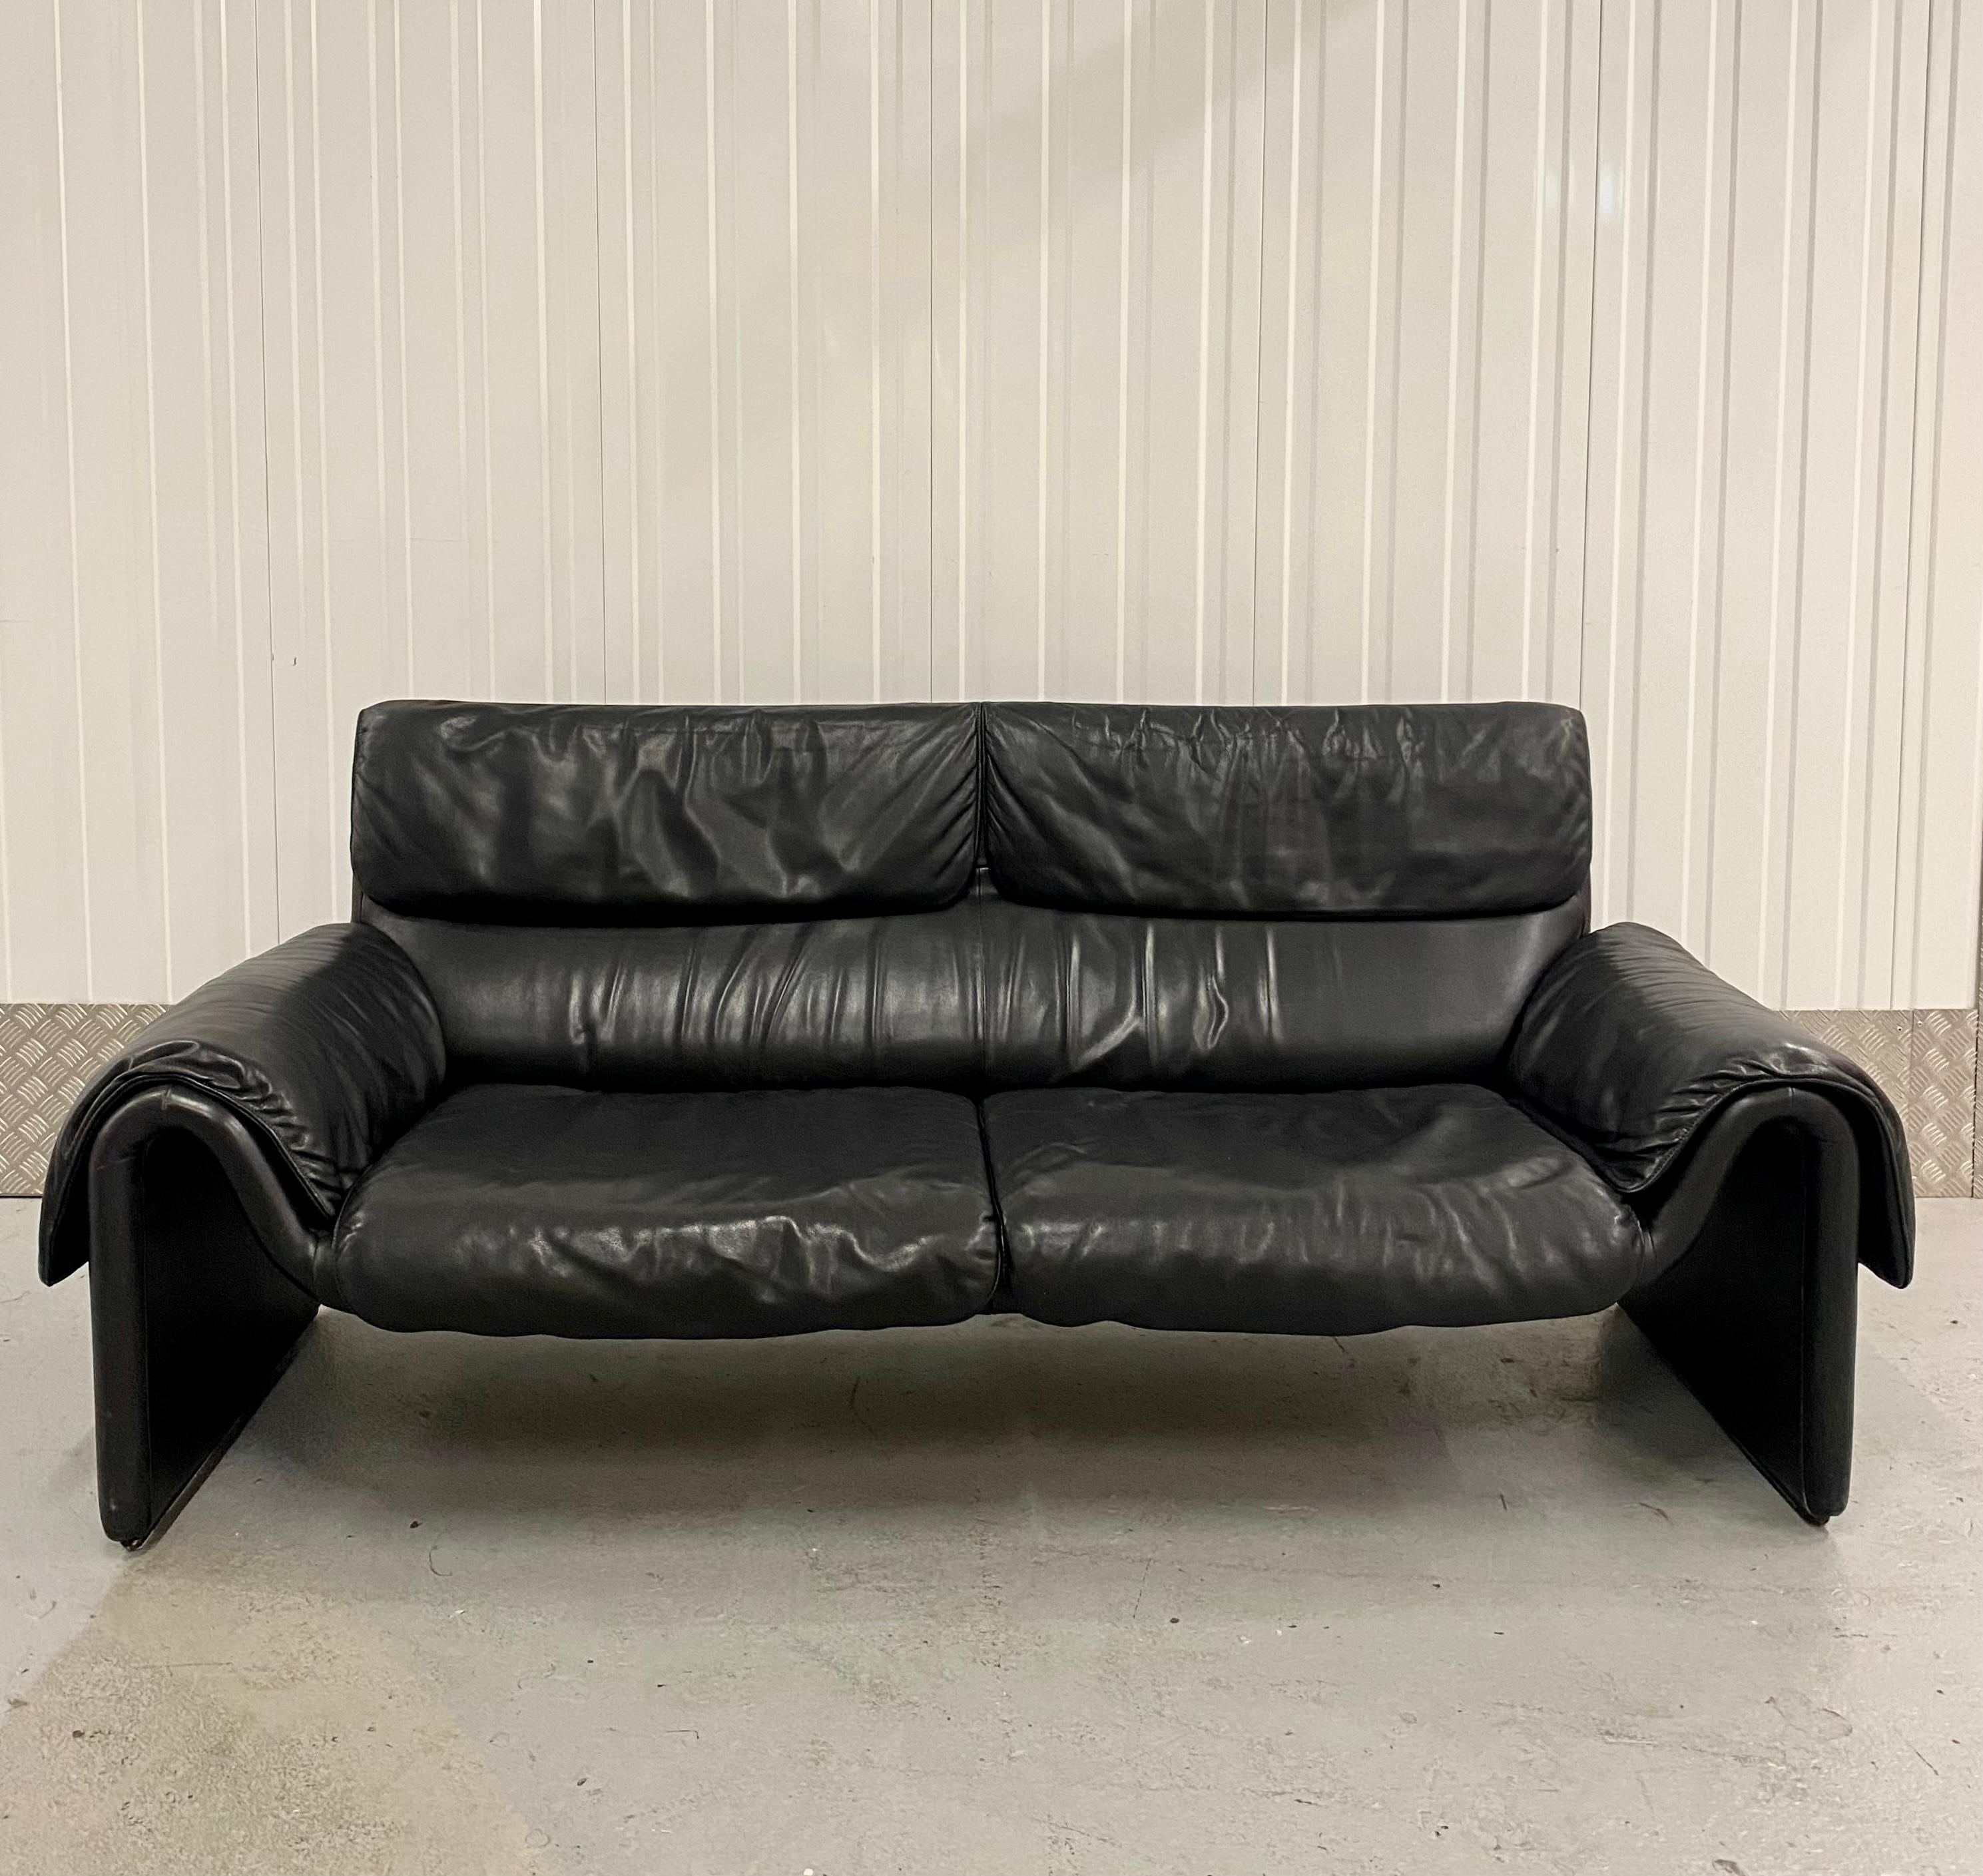 Stunning design with organic forms manufactured by De Sede Switzerland circa 1980-1989. The black leather sofa remains in good condition, with normal wear consisting it’s age and use. Signed, gorgeous timeless design!